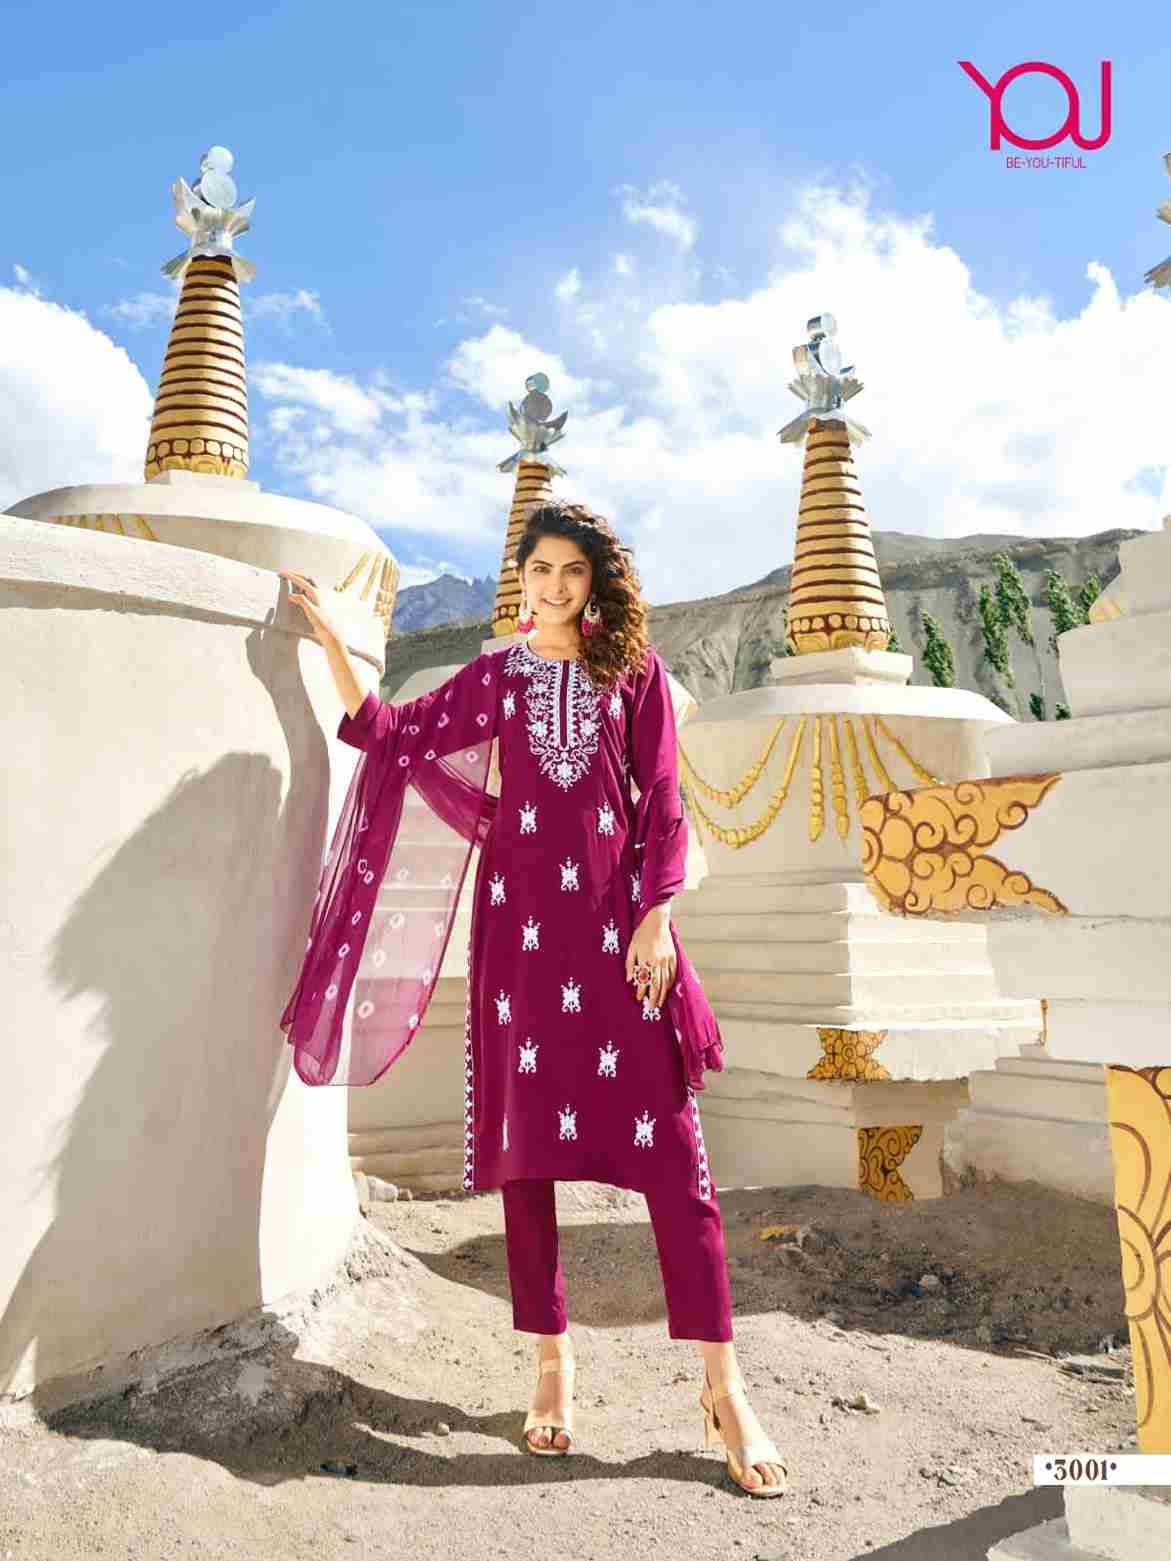 Aashvi By You 5001 To 5007 Series Beautiful Festive Suits Colorful Stylish Fancy Casual Wear & Ethnic Wear Rayon Slub Embroidered Dresses At Wholesale Price